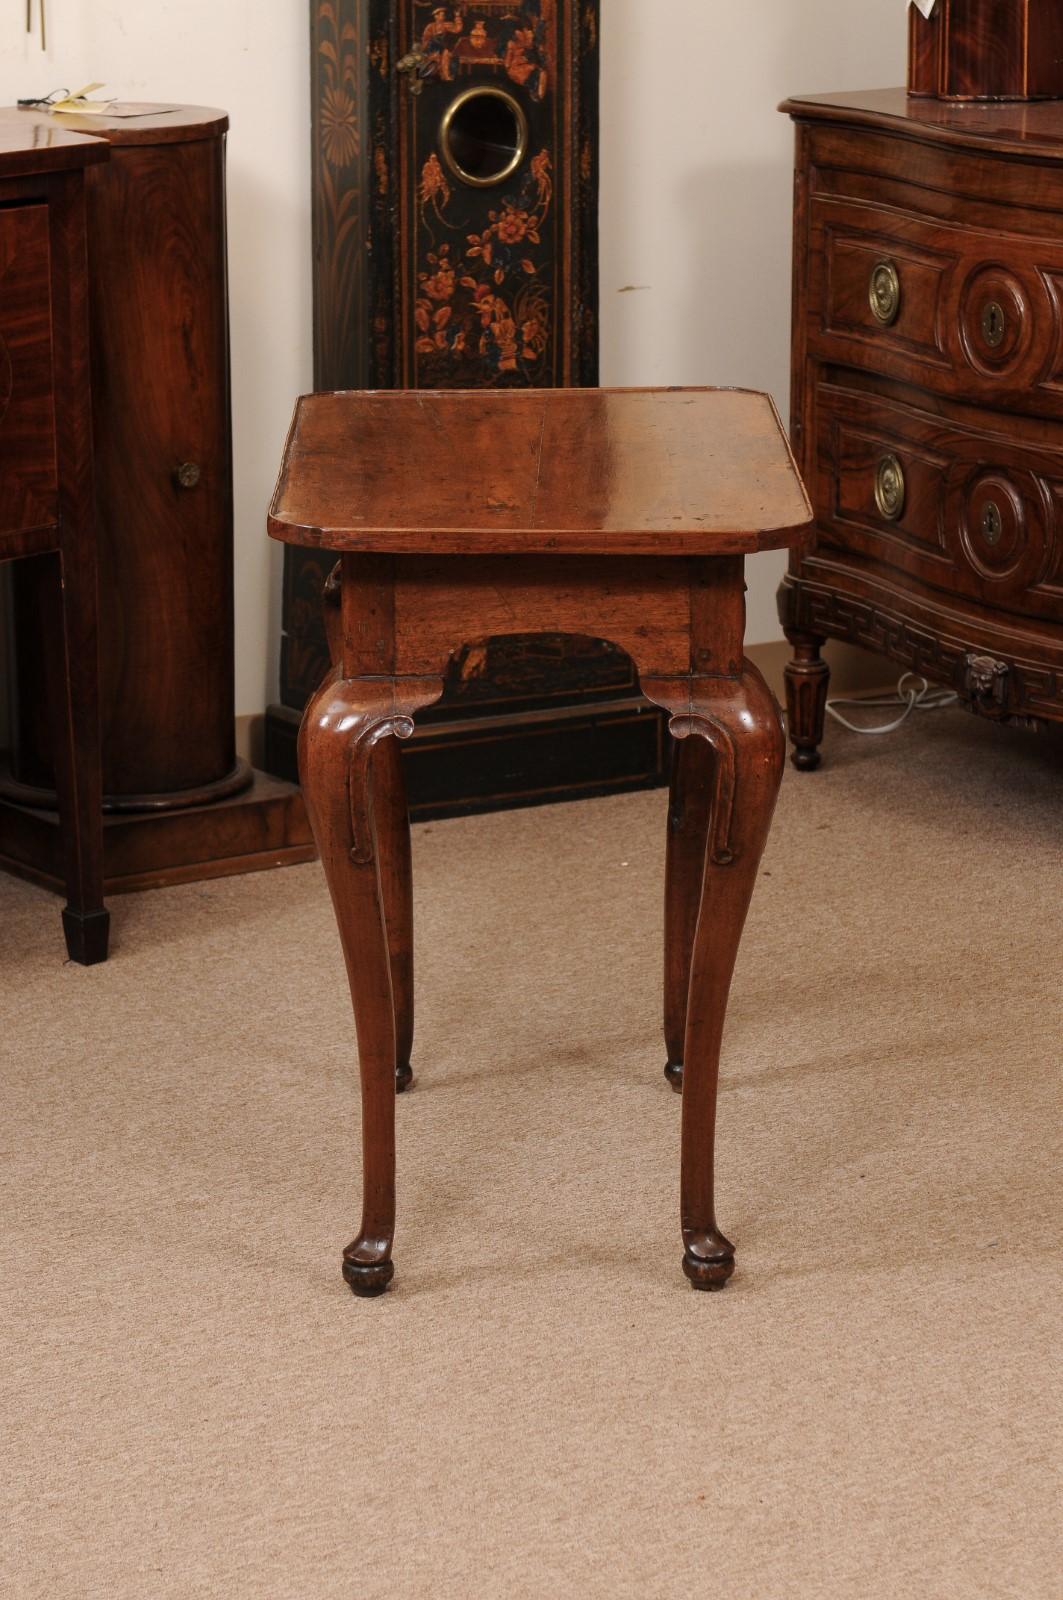 Early 18th Century Italian Walnut Side Table with Tray Top, Drawer, Cabriole Leg For Sale 2